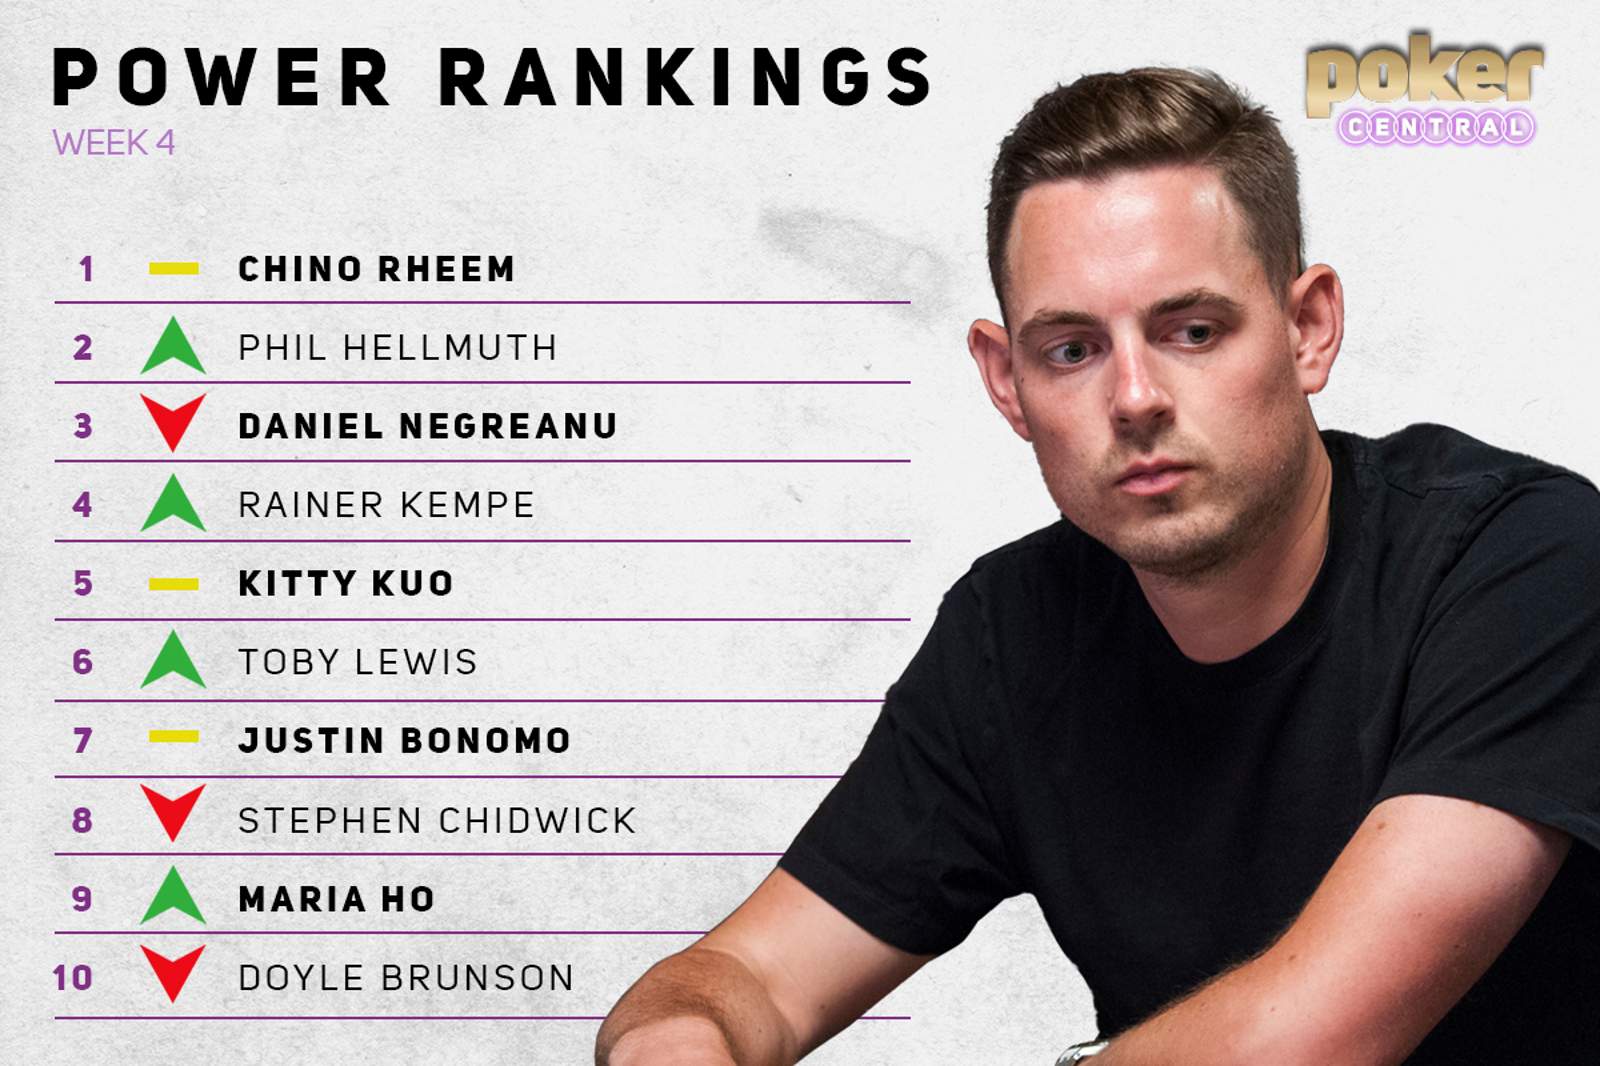 Poker Central Power Rankings: Lewis Looms Large Down Under